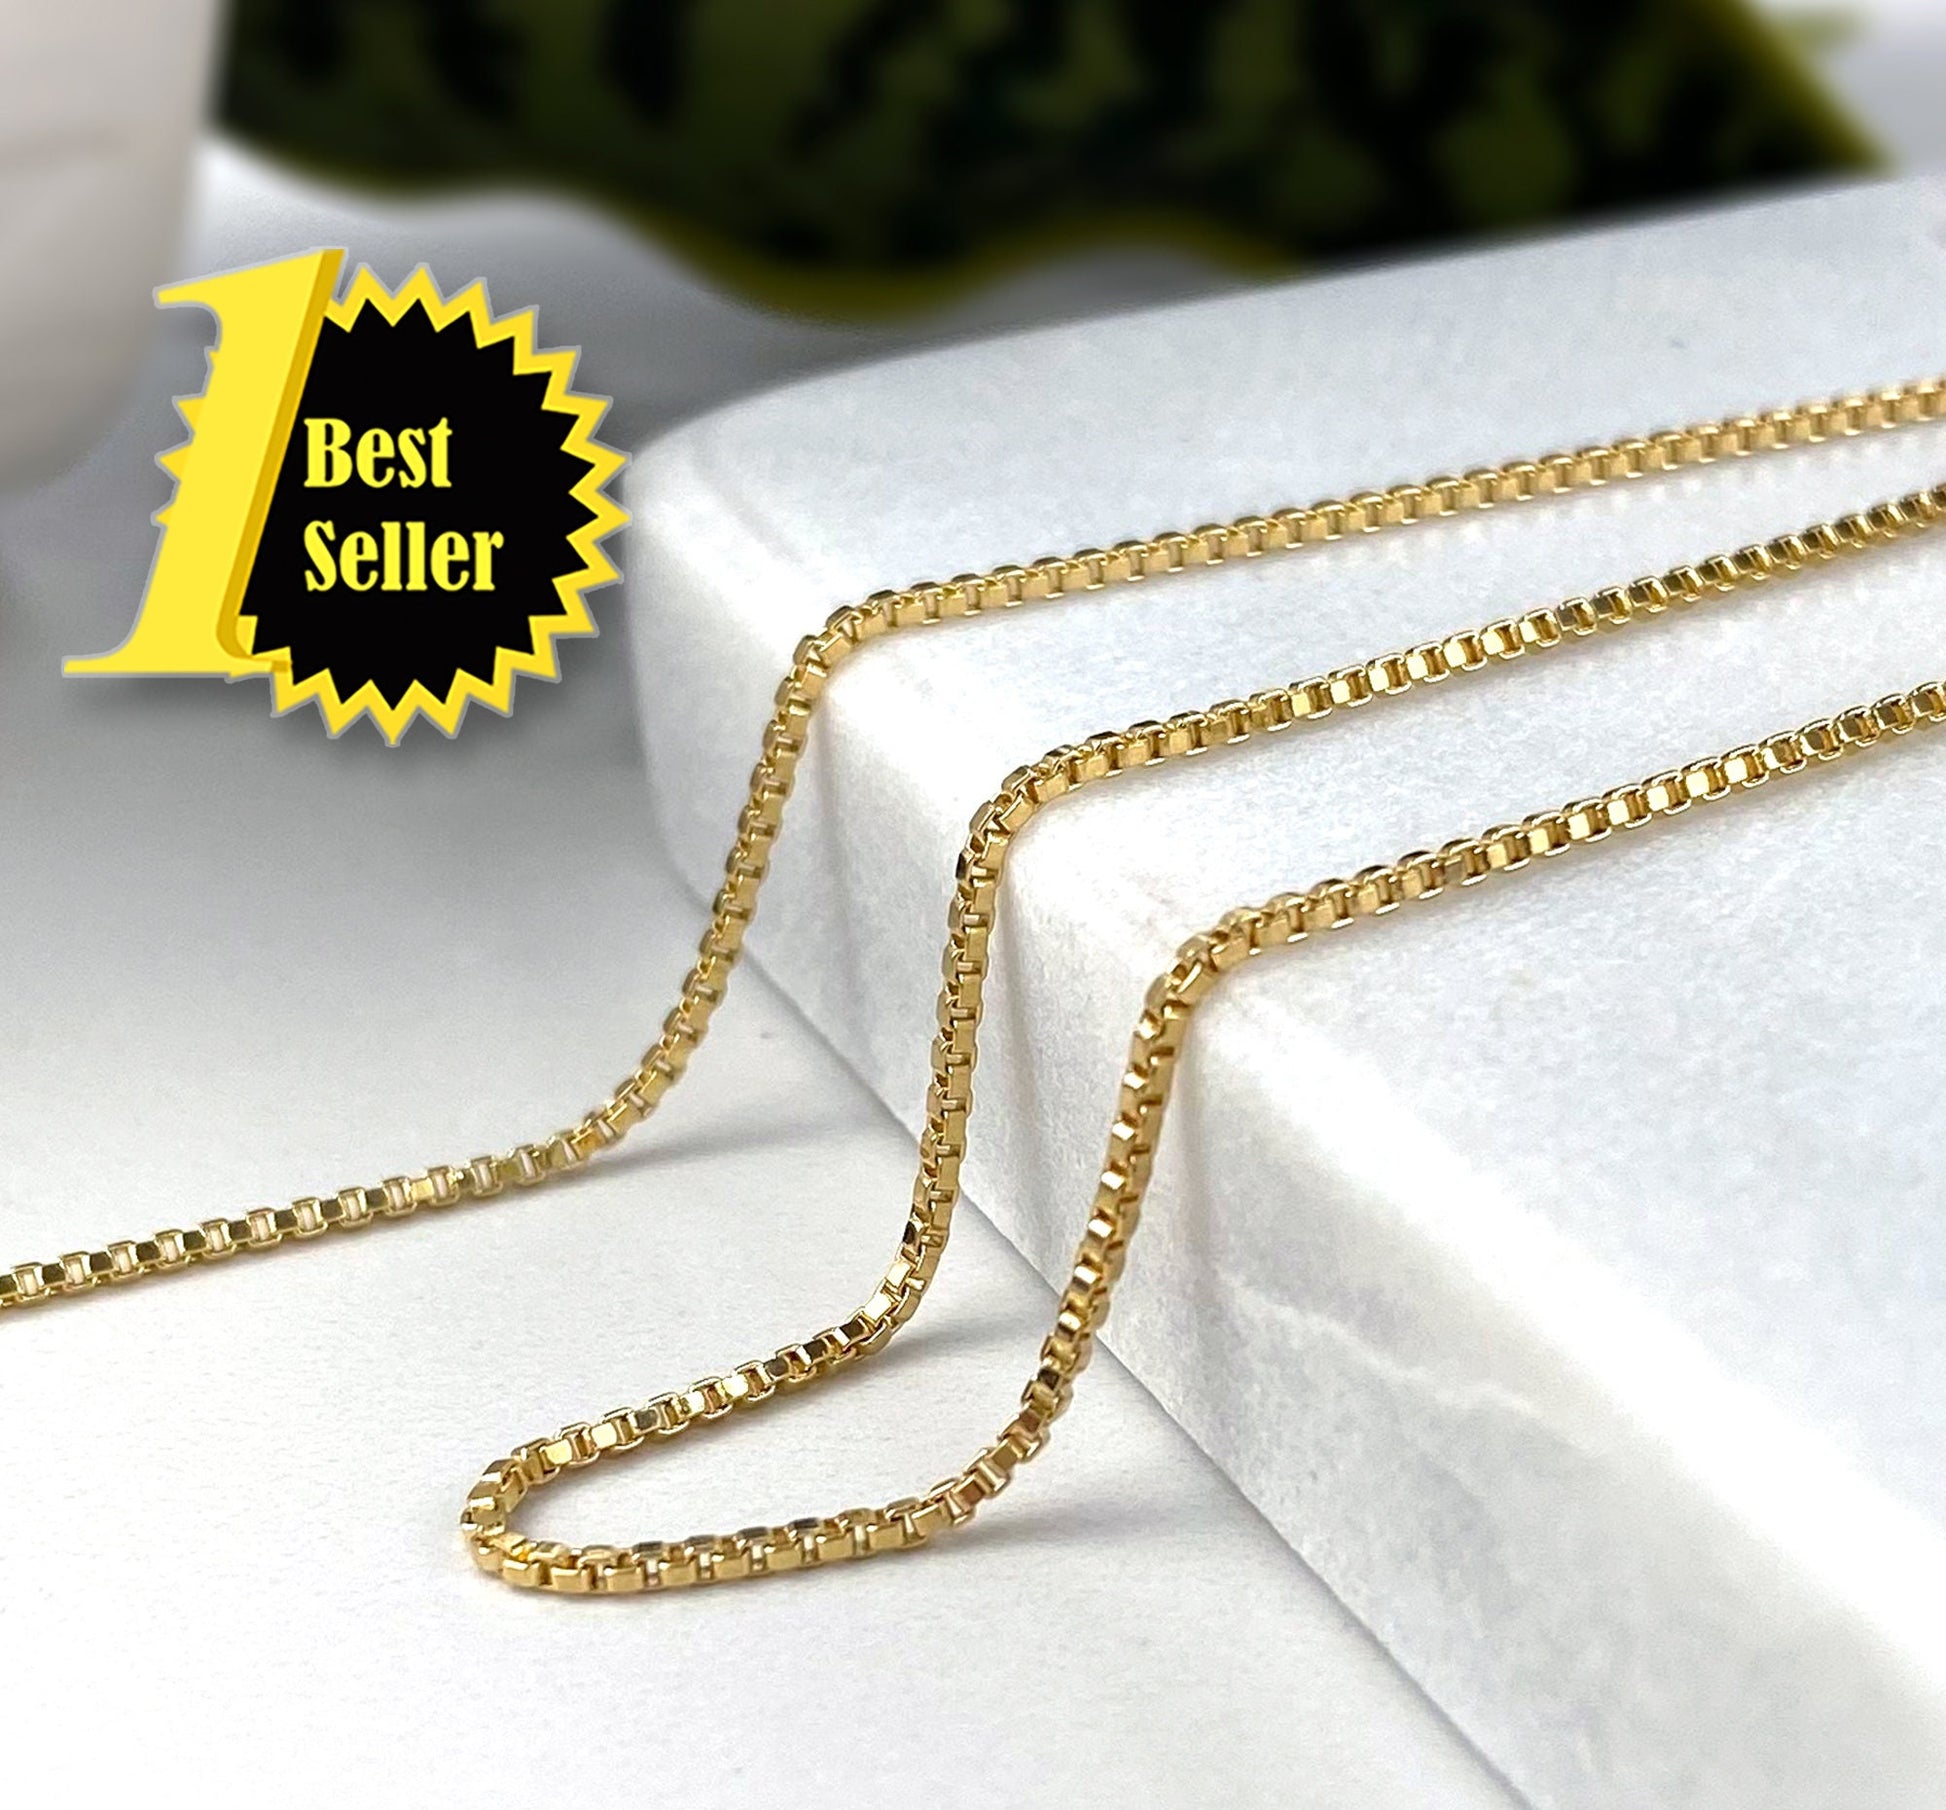 18k Gold Filled Fancy Box Chain 1mm, You May Add Extender Perfecting Your Size Wholesale Jewelry Making Supplies - Creative Styling Design